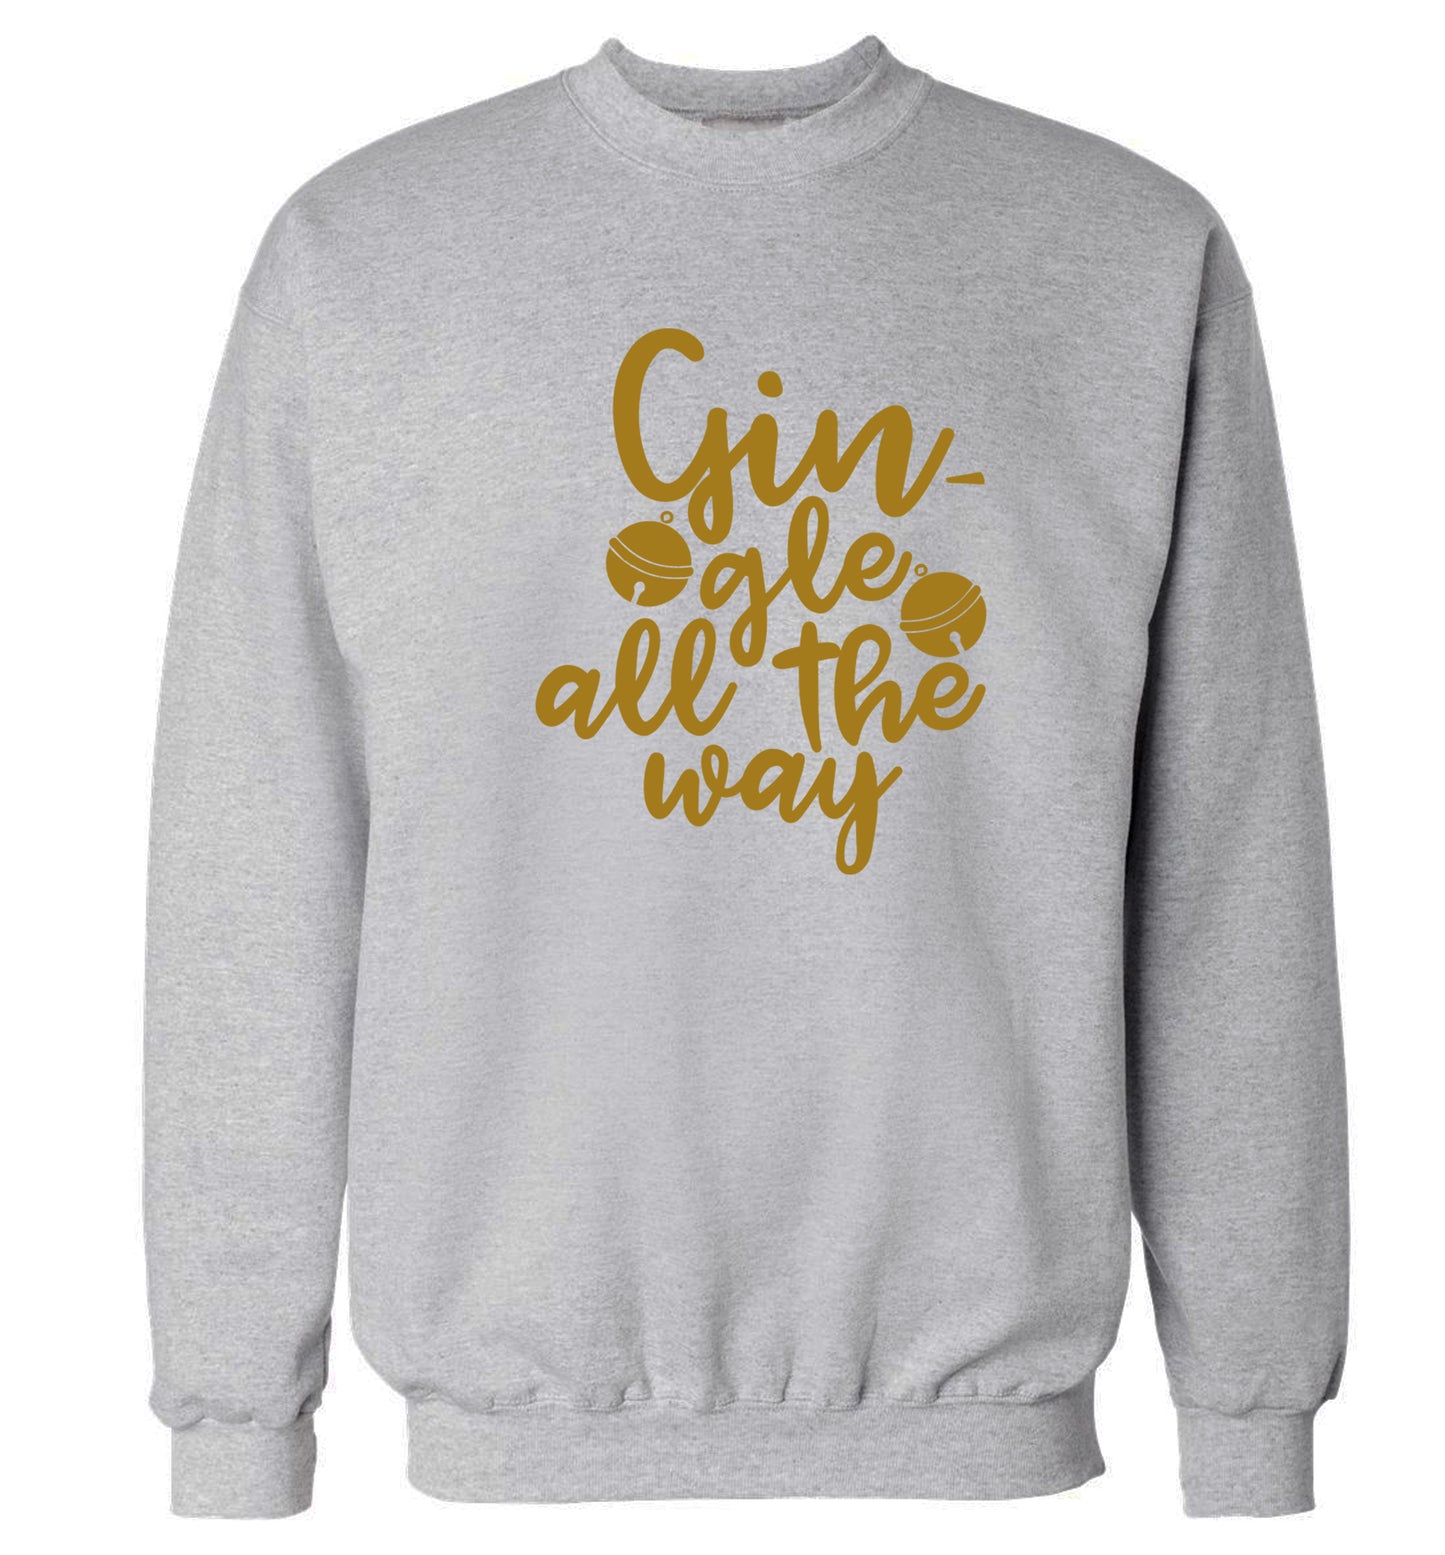 Gin-gle all the way Adult's unisex grey Sweater 2XL